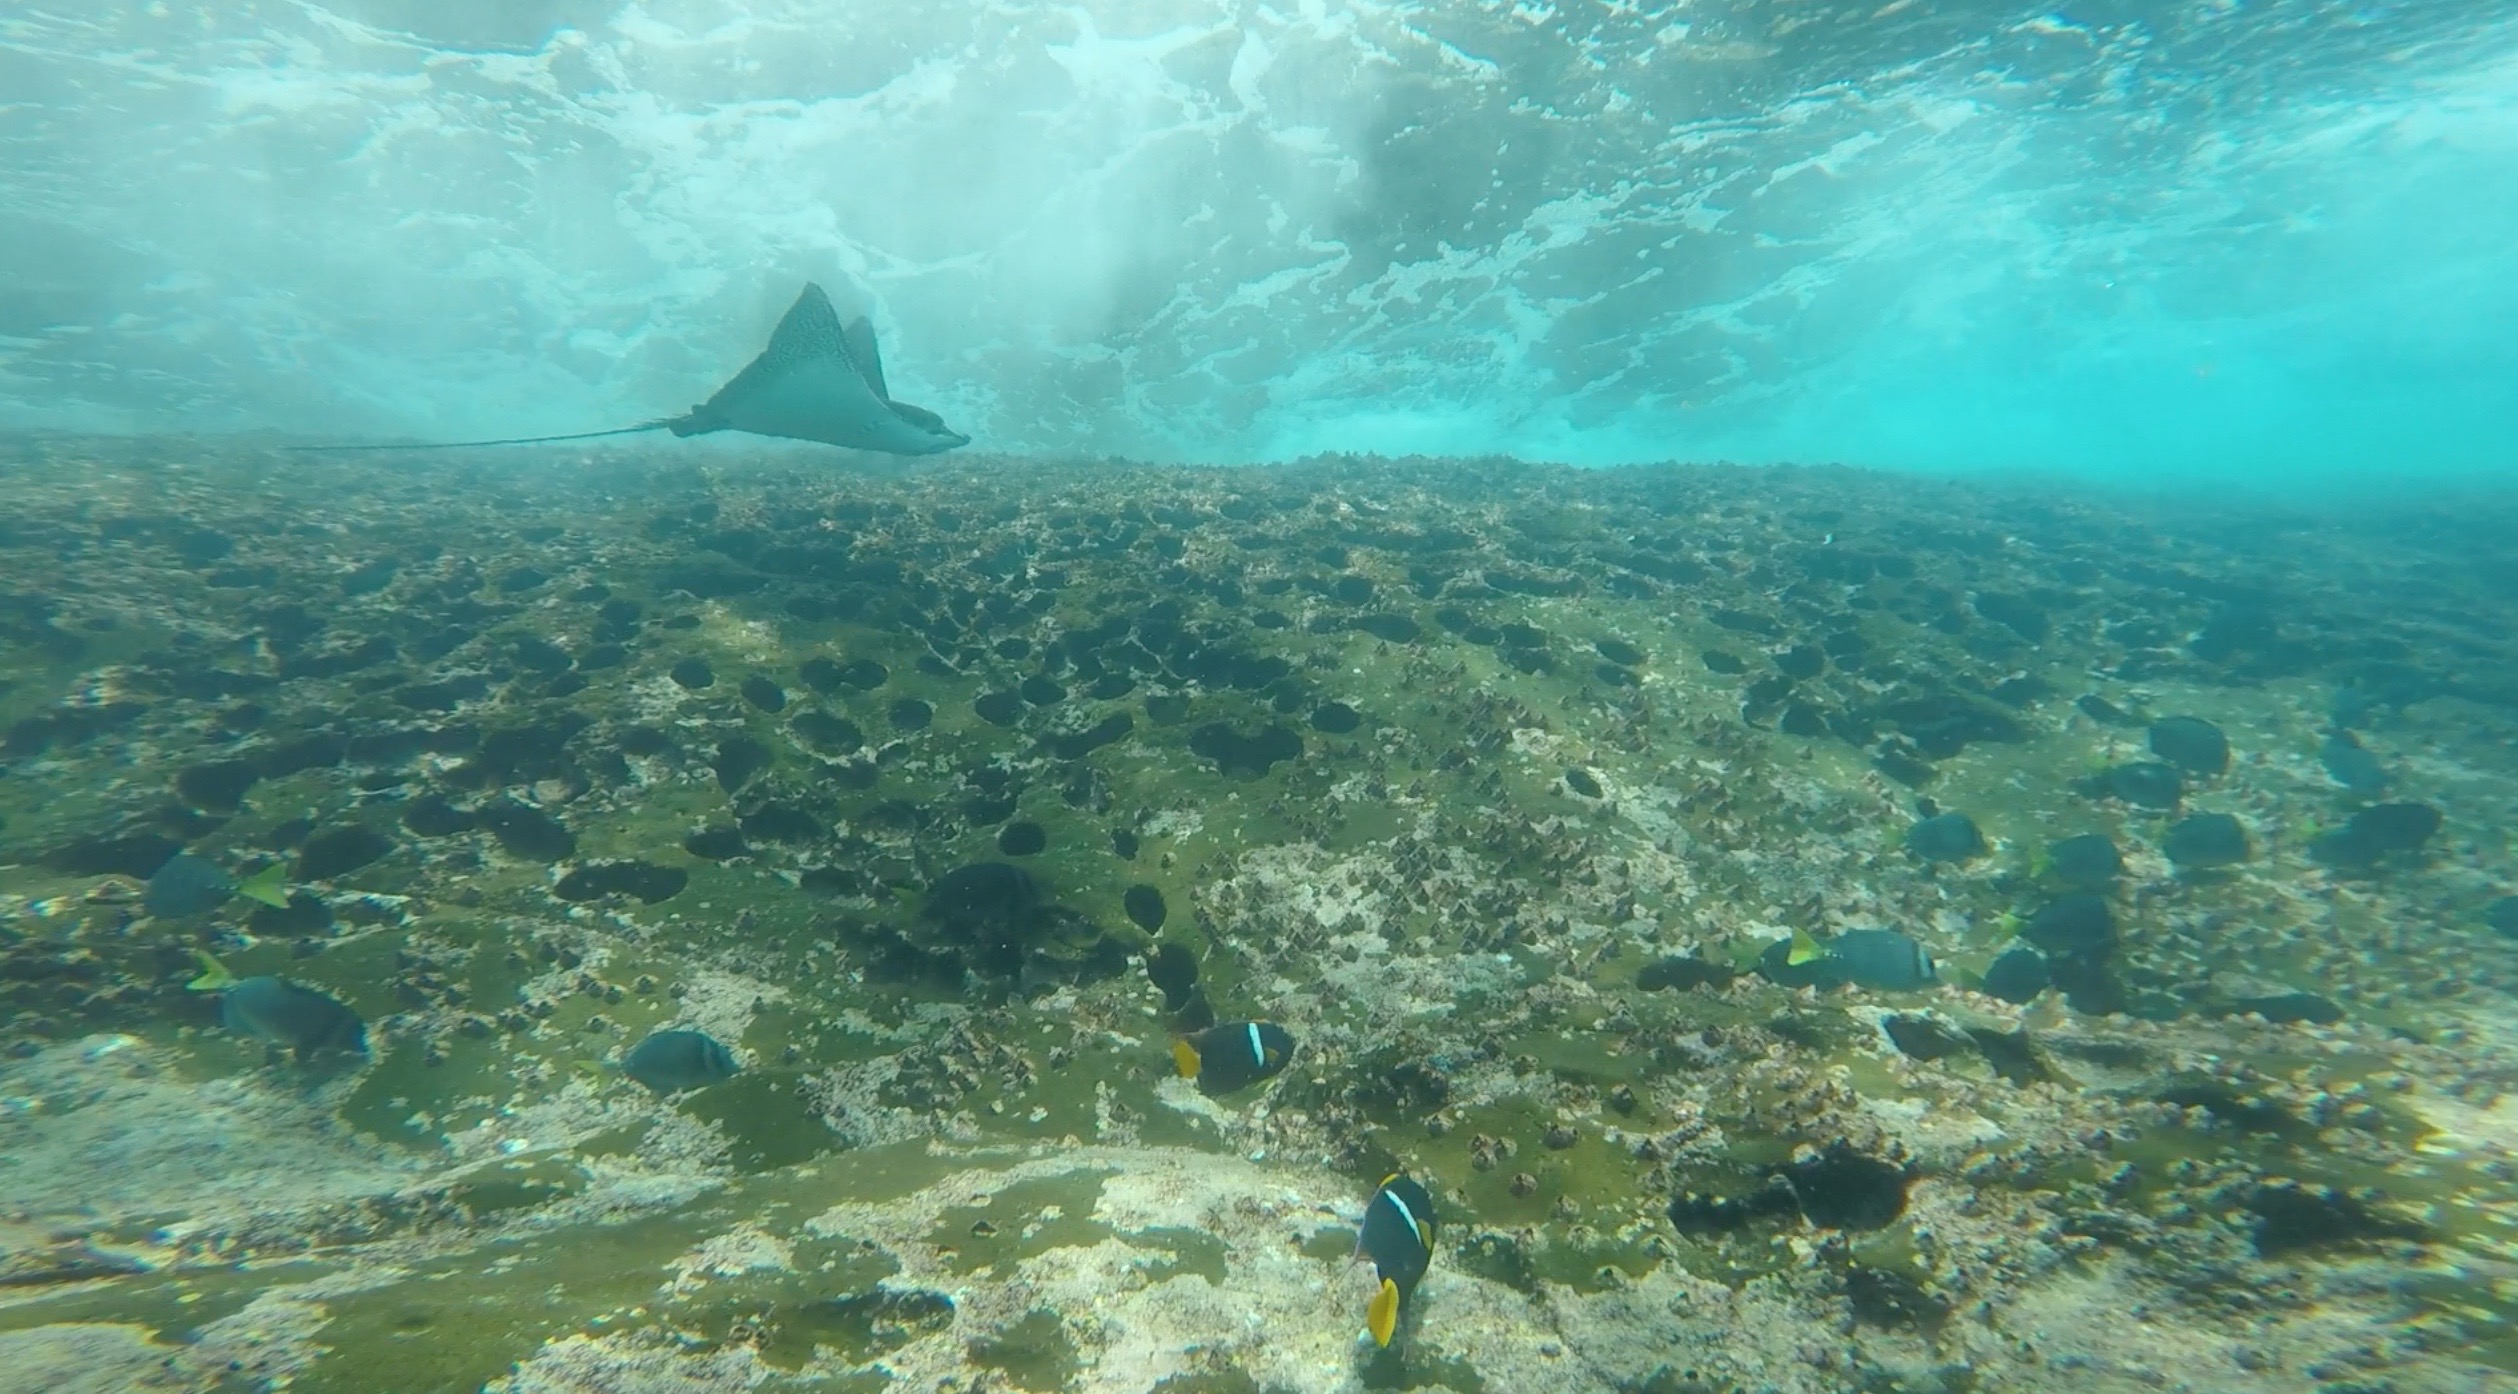 Ray and fishes underwater in Galapagos, Ecuador. Swimming with sharks in the Galapagos